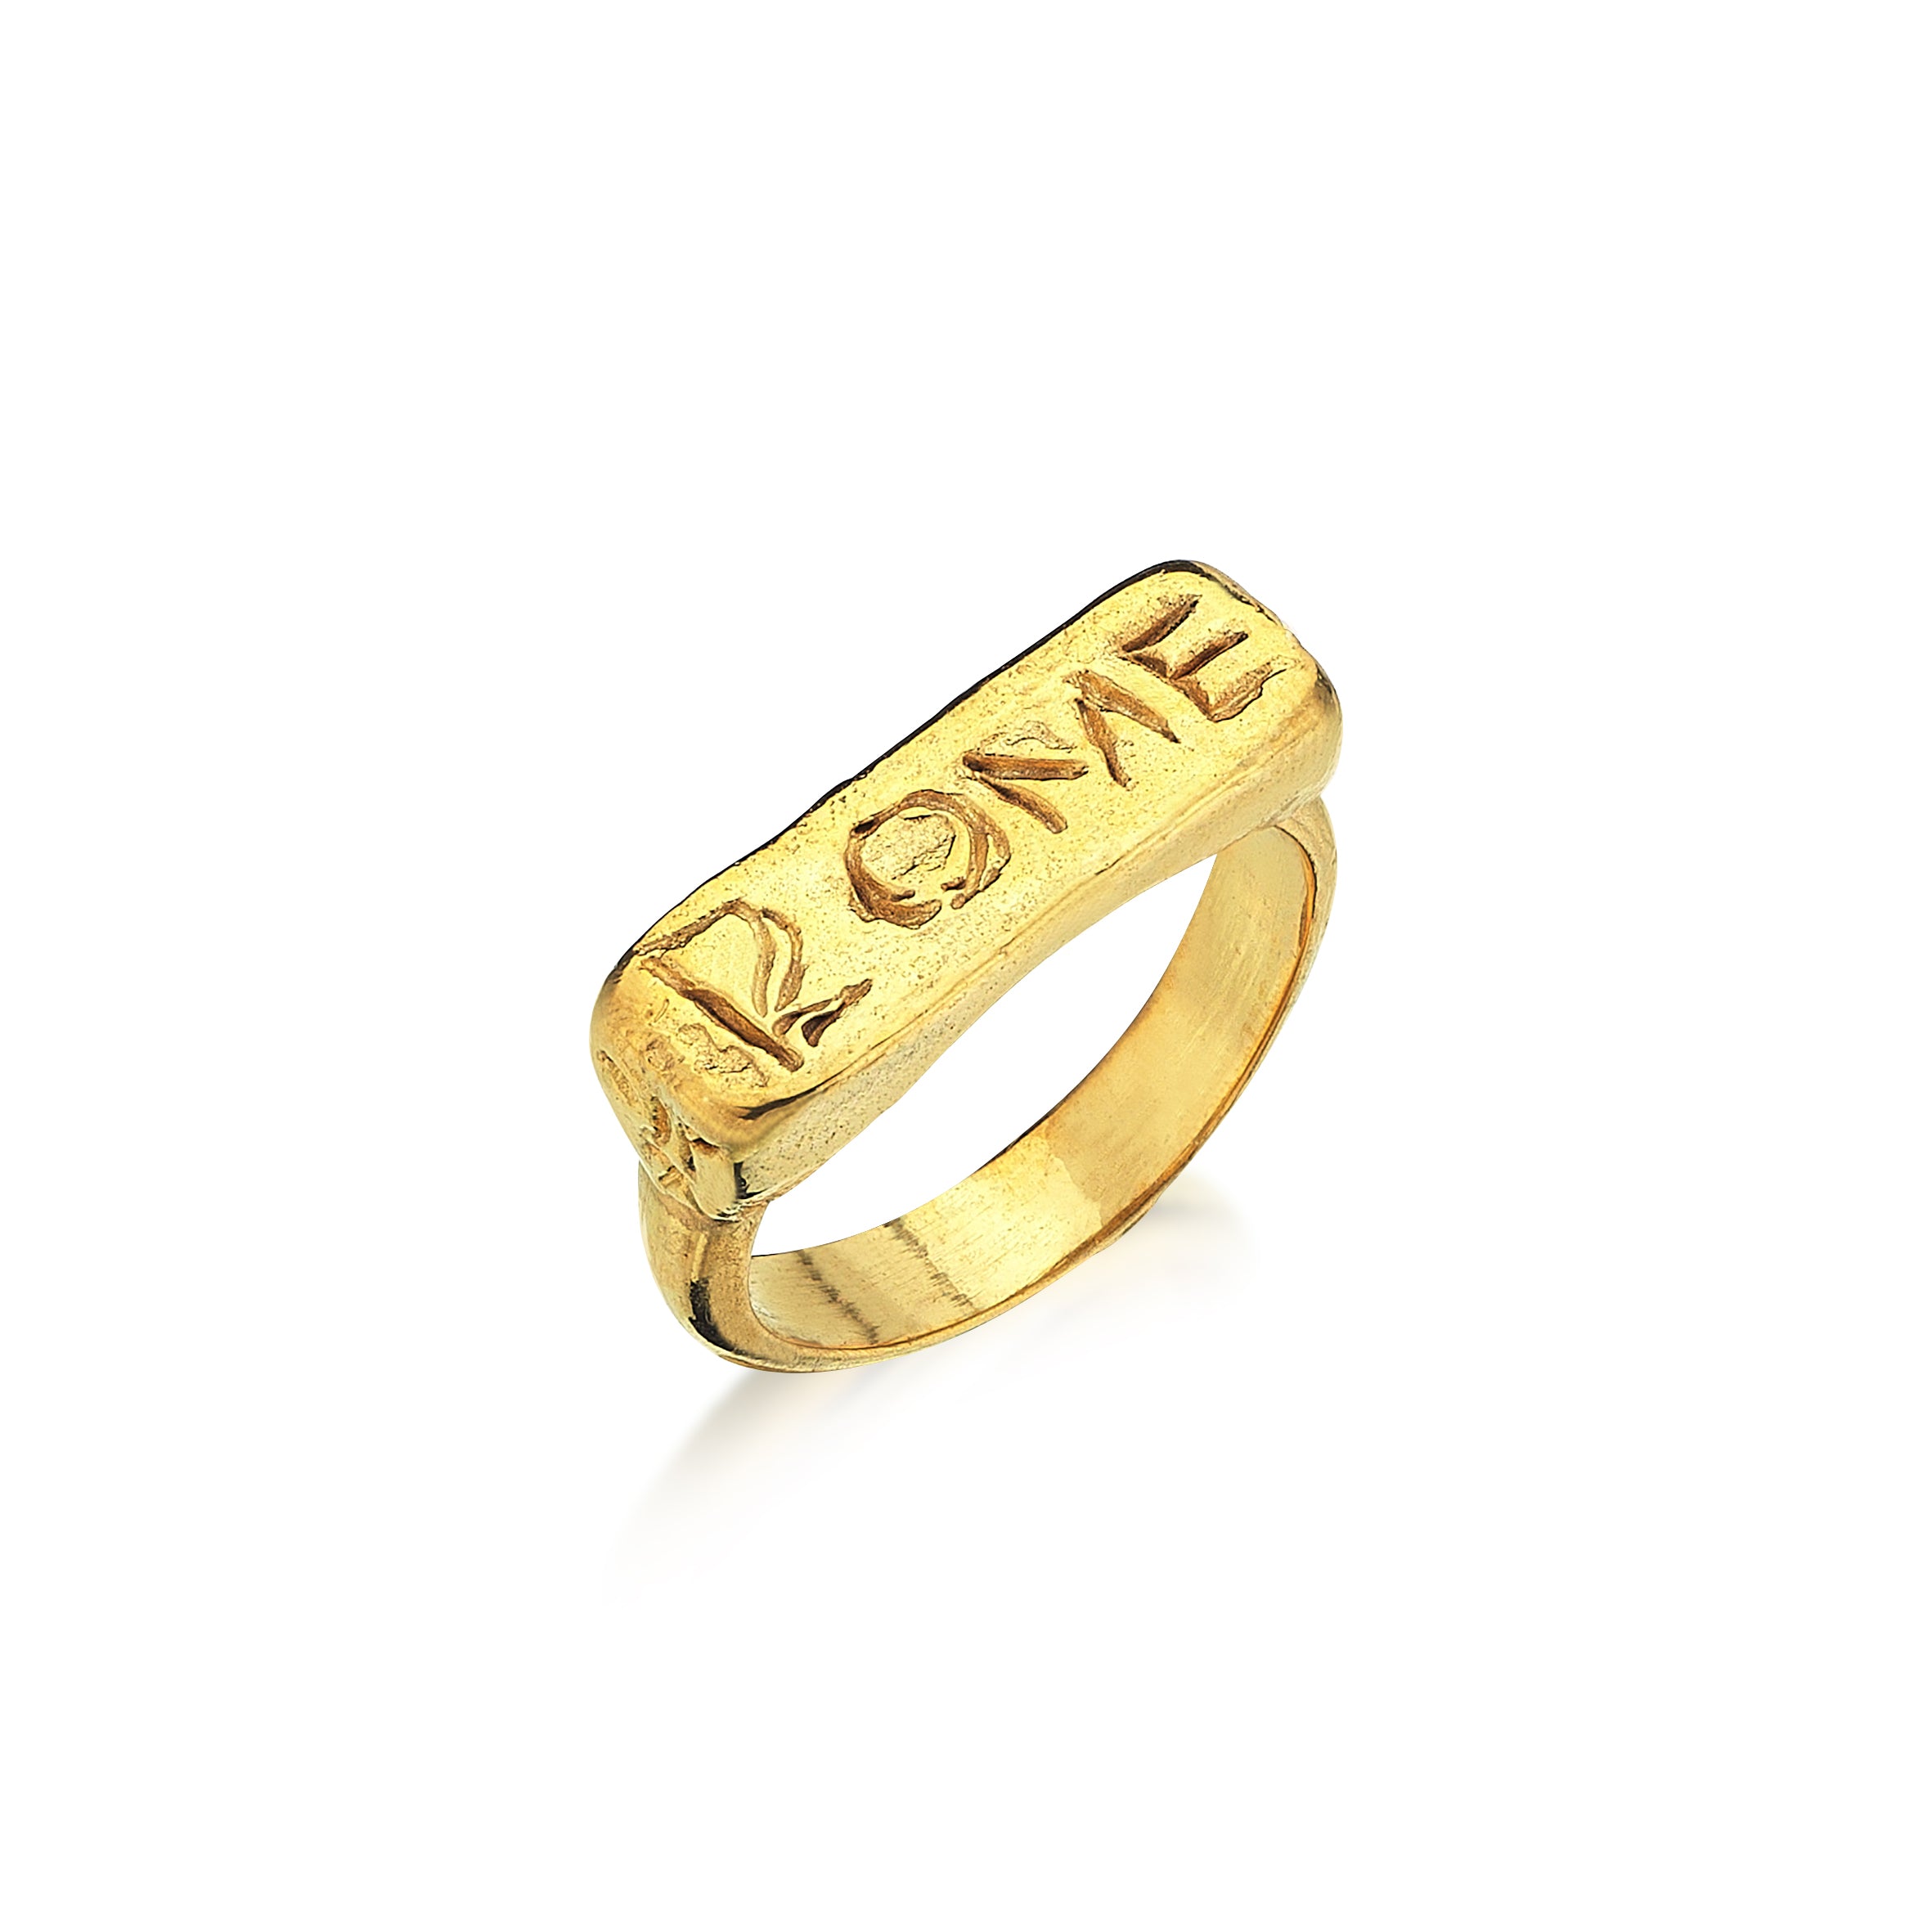 THE ROME RING